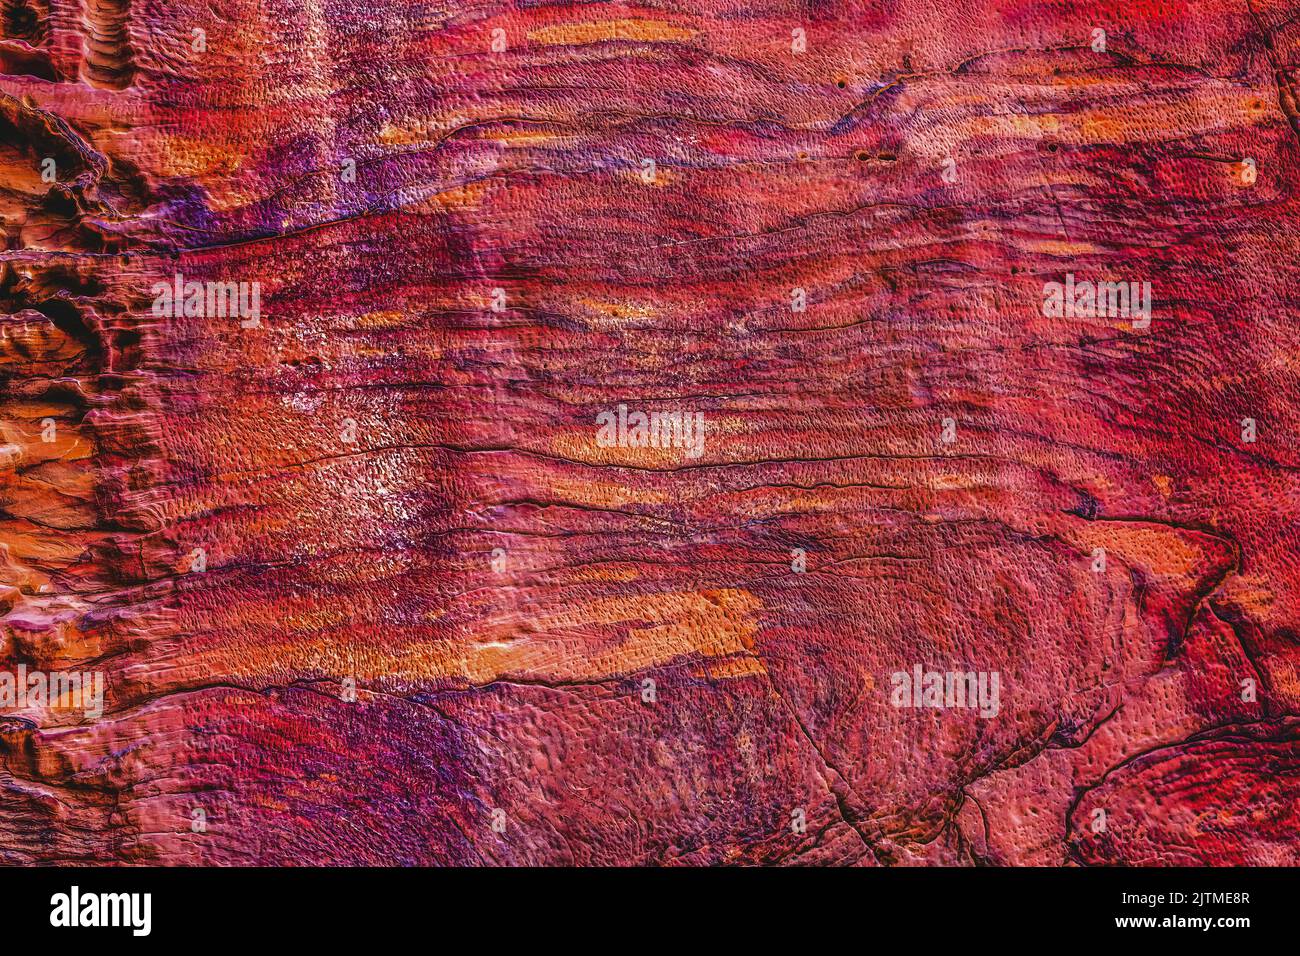 Rose Red Rock Tomb Facade Abstract, Street of acades Petra Jordan Built by  Nabataens in 200 BC to 400 AD  Red canyon walls create many abstracts clos Stock Photo